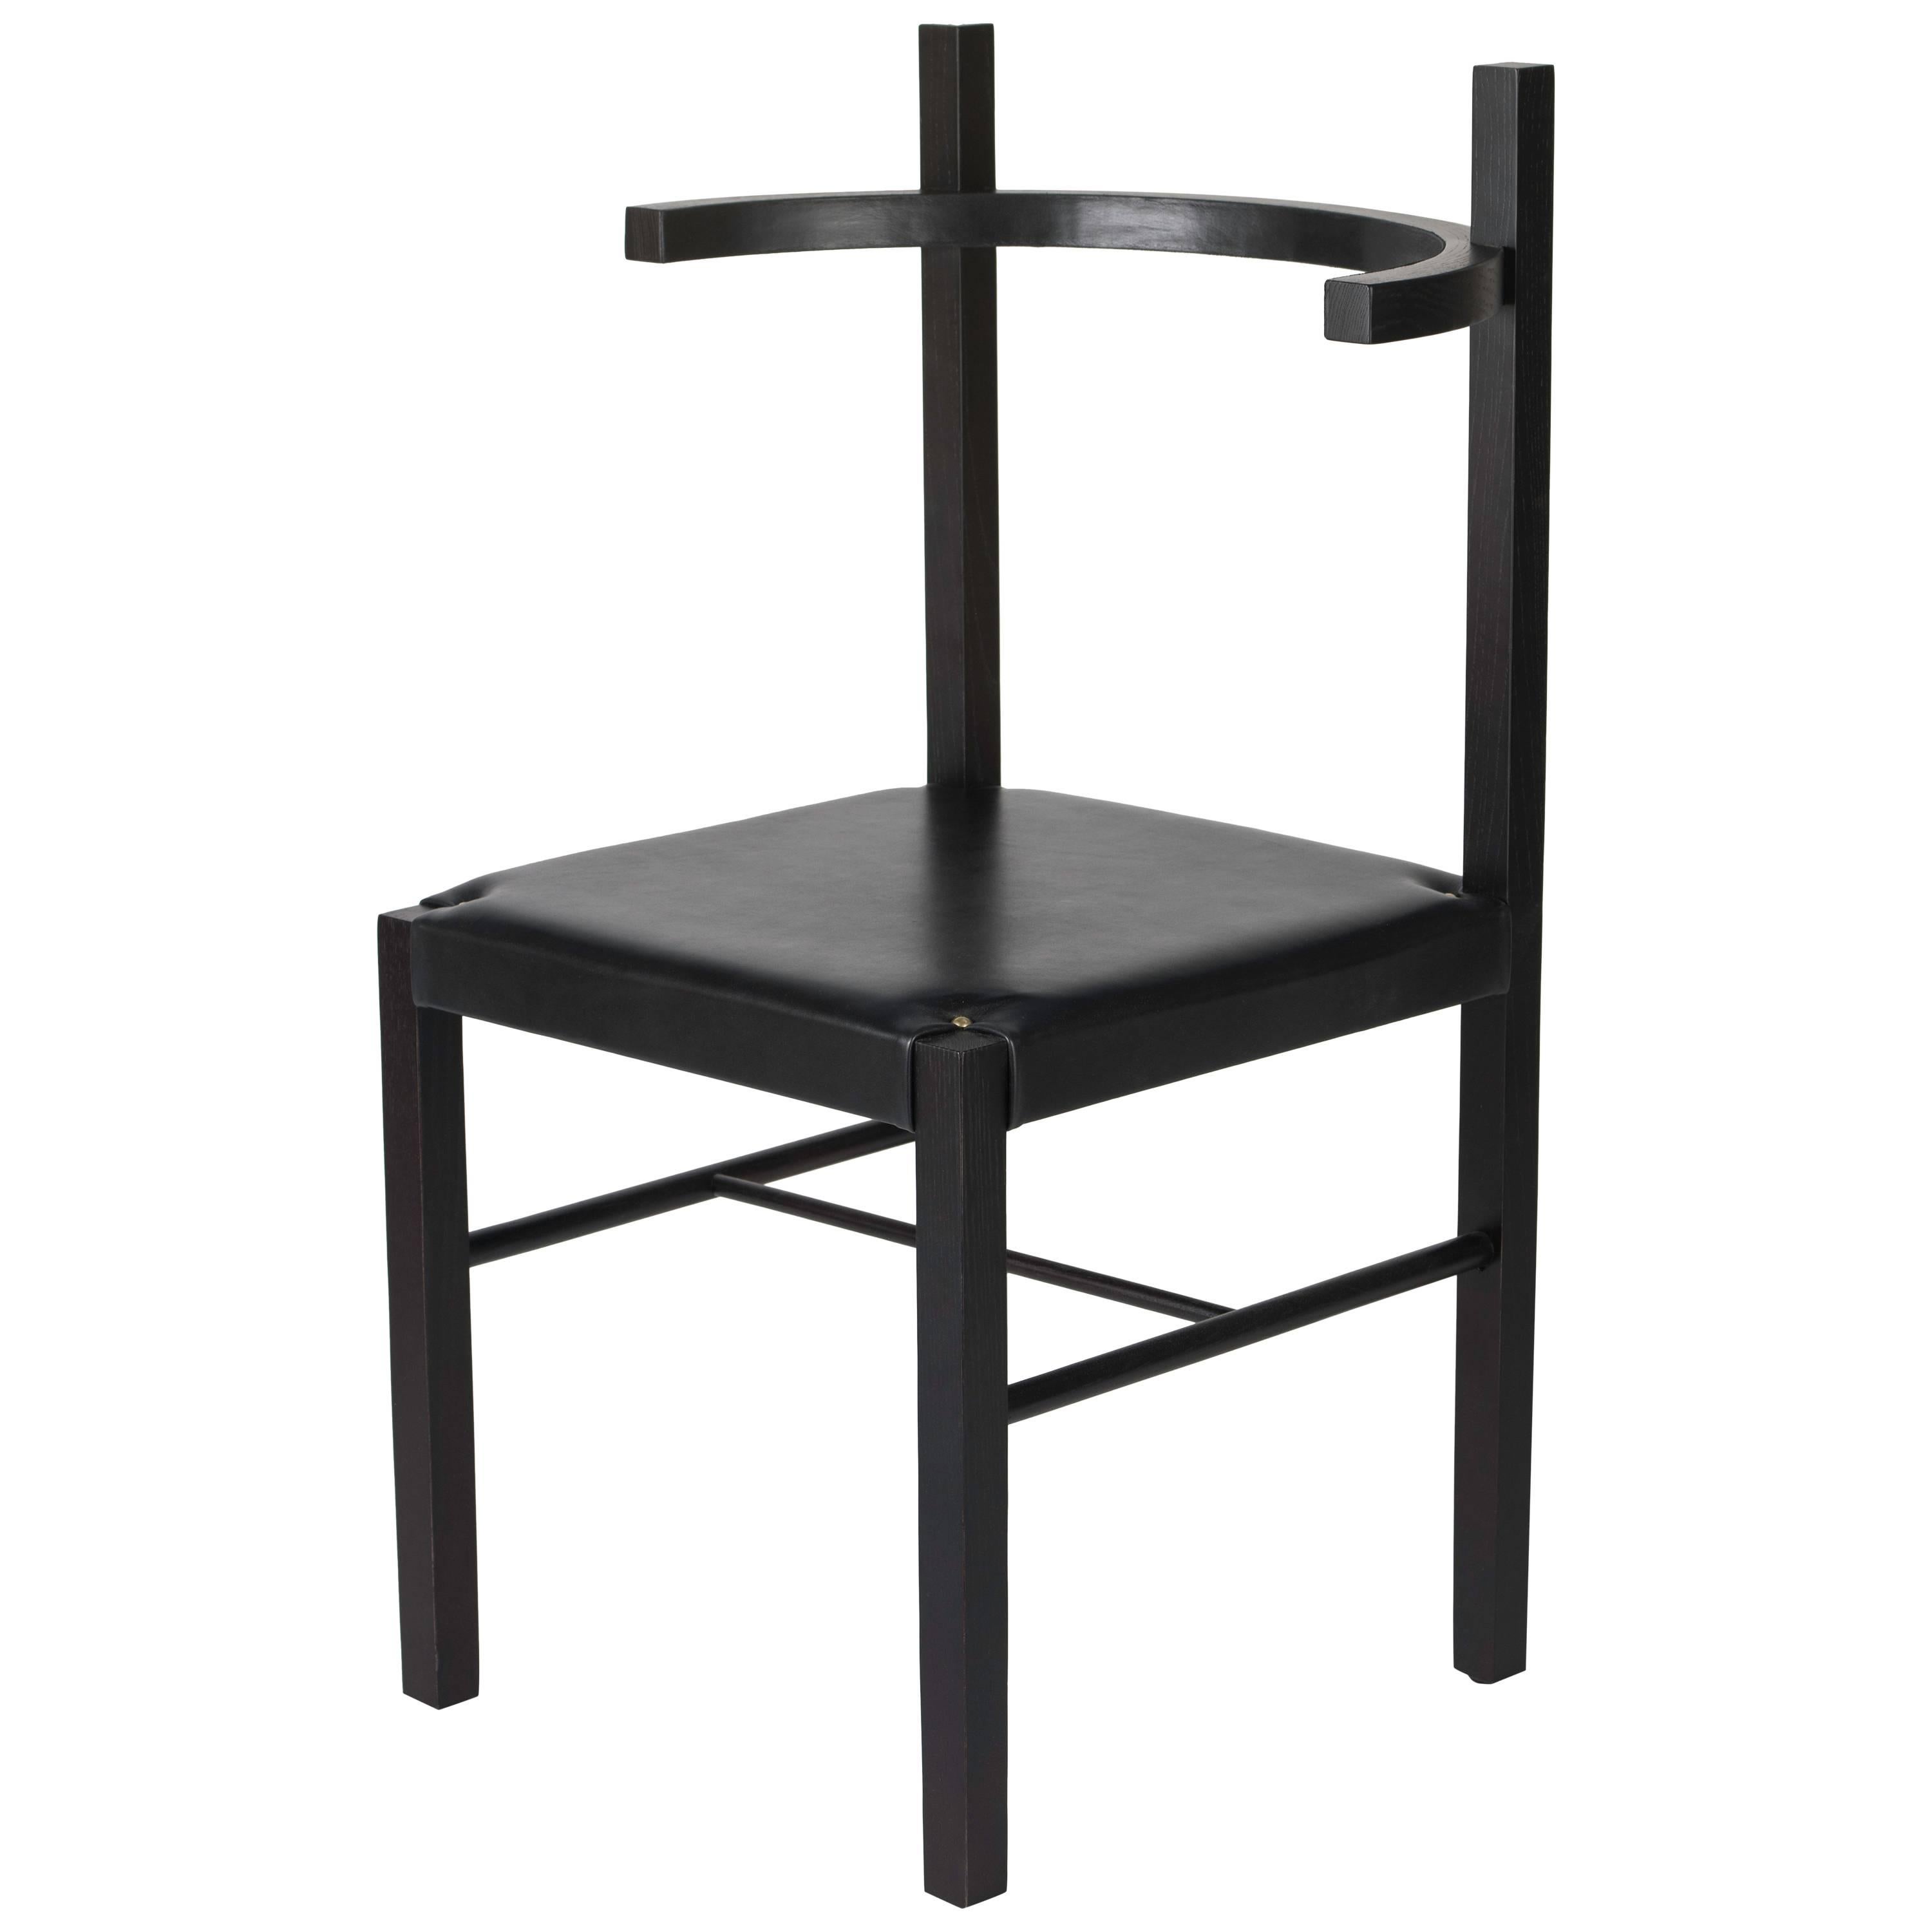 Soren Chair in Ebony Ash and Black Leather